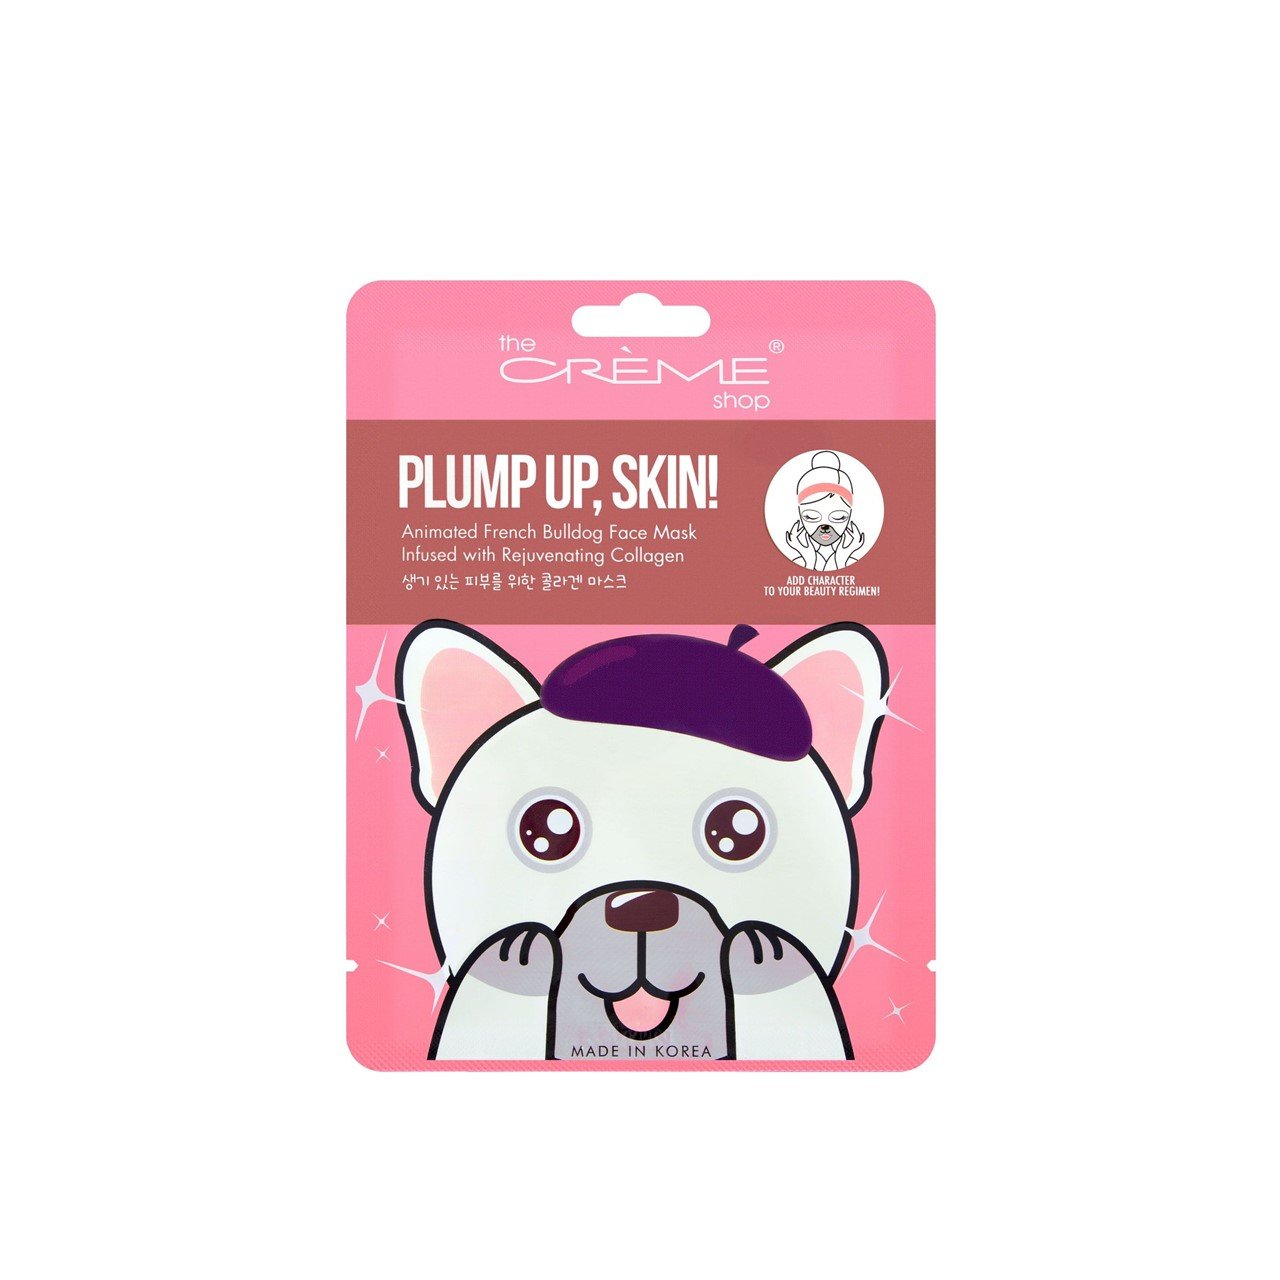 The Crème Shop Plump Up, Skin! Animated French Bulldog Face Mask 25g (0.88 oz)